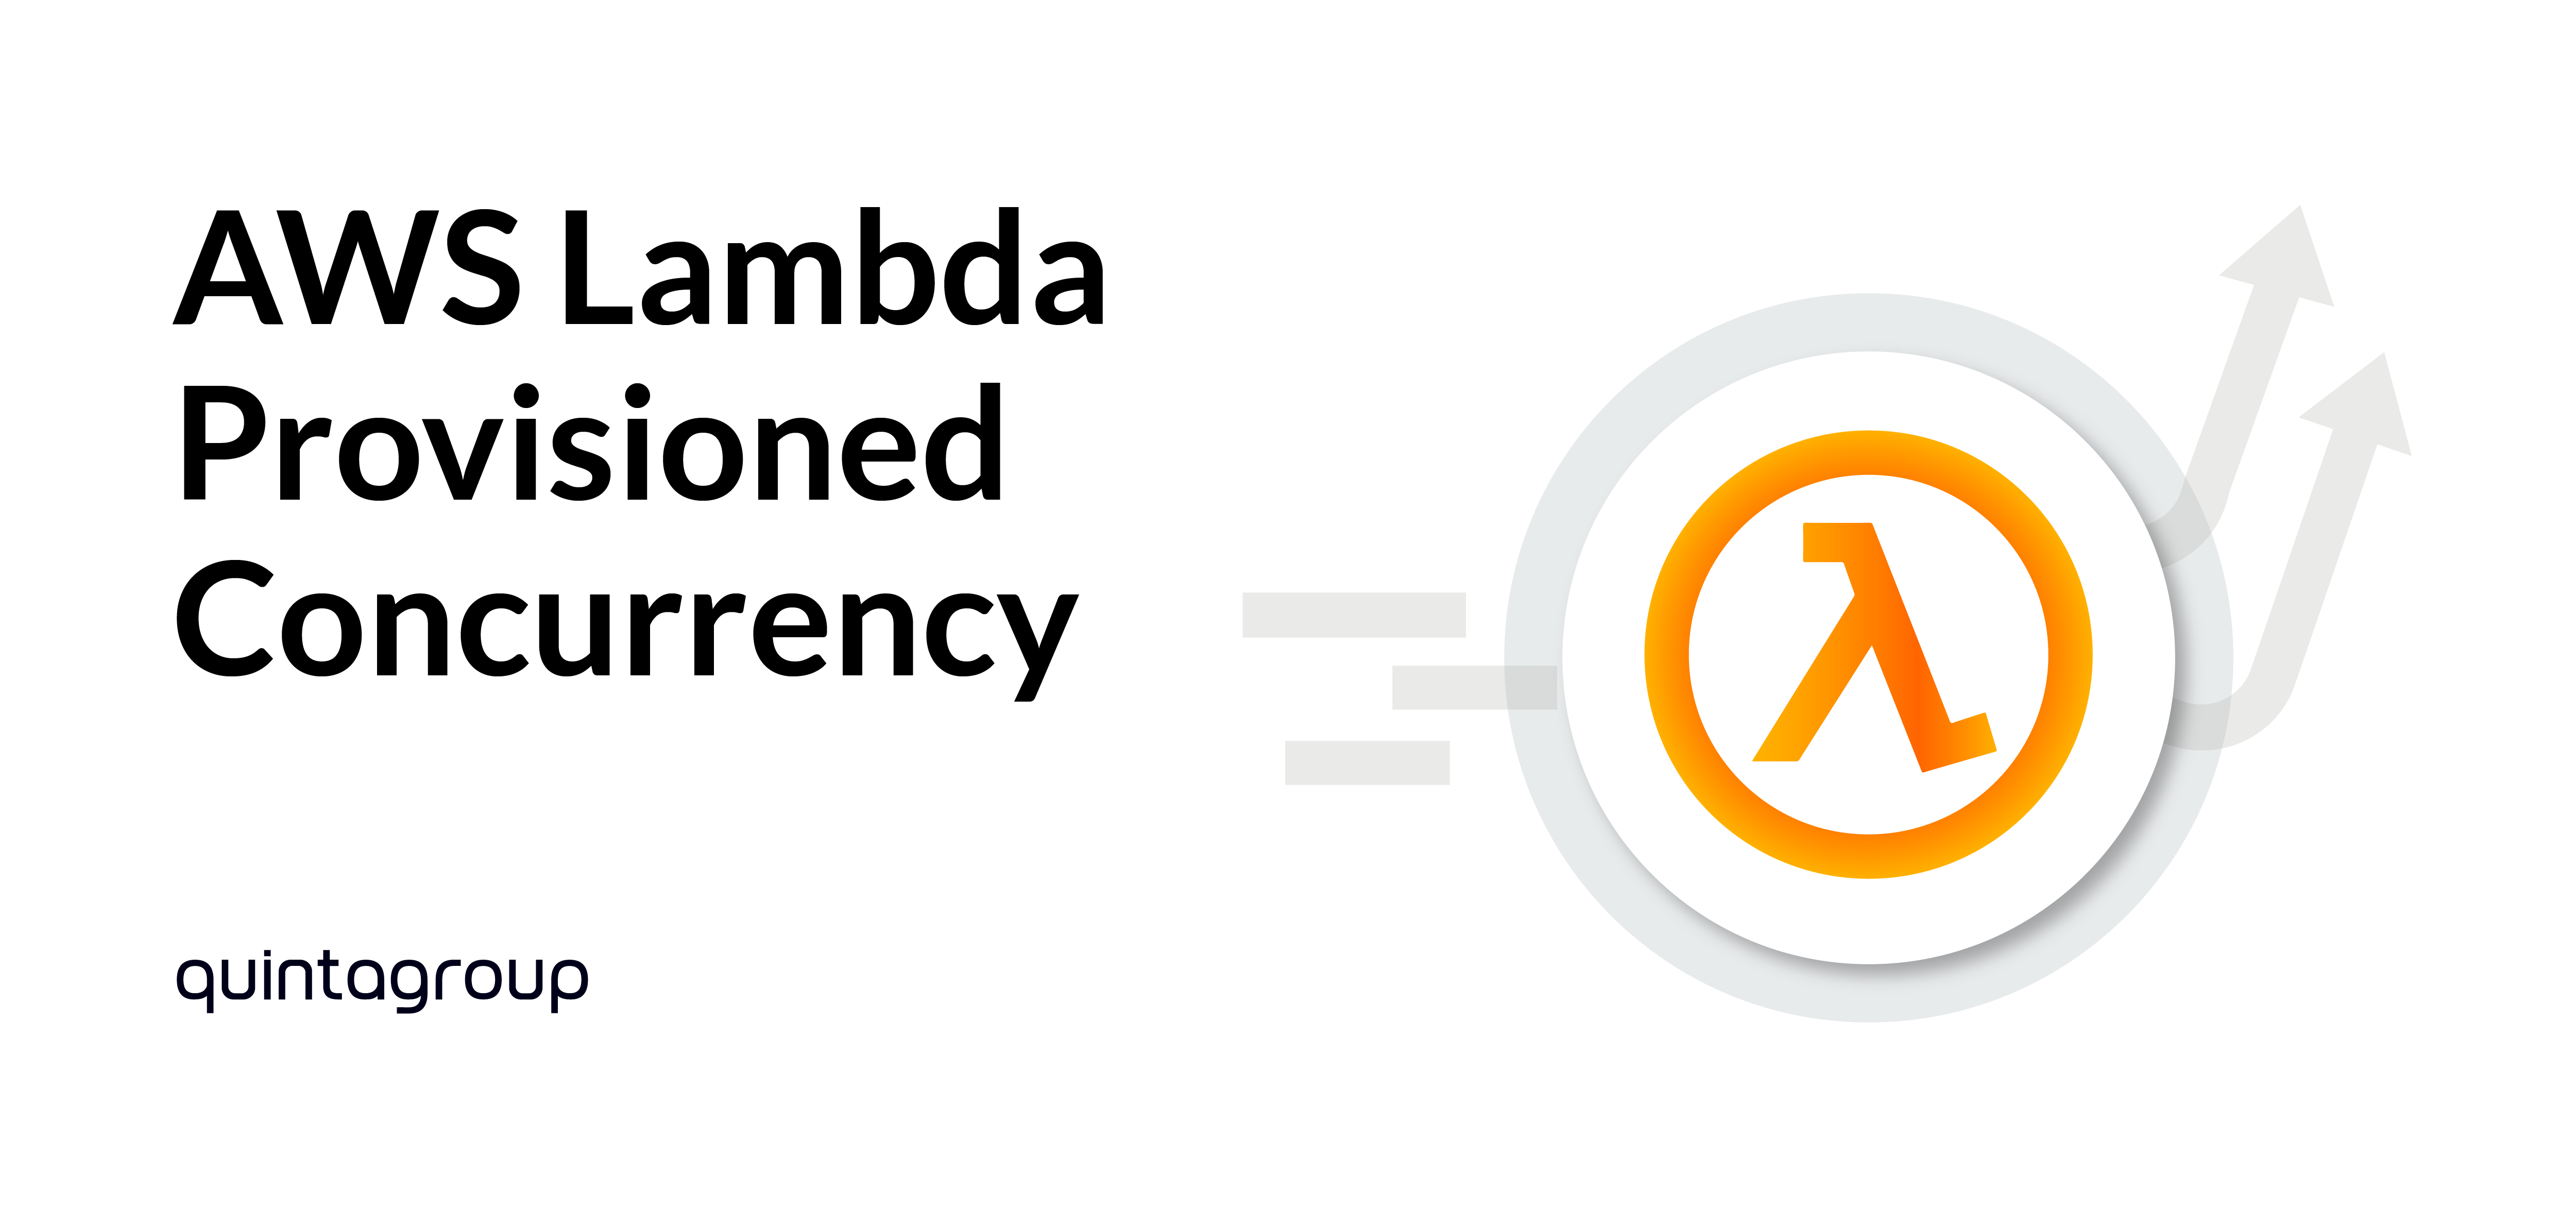 AWS Lambda Provisioned Concurrency.jpg